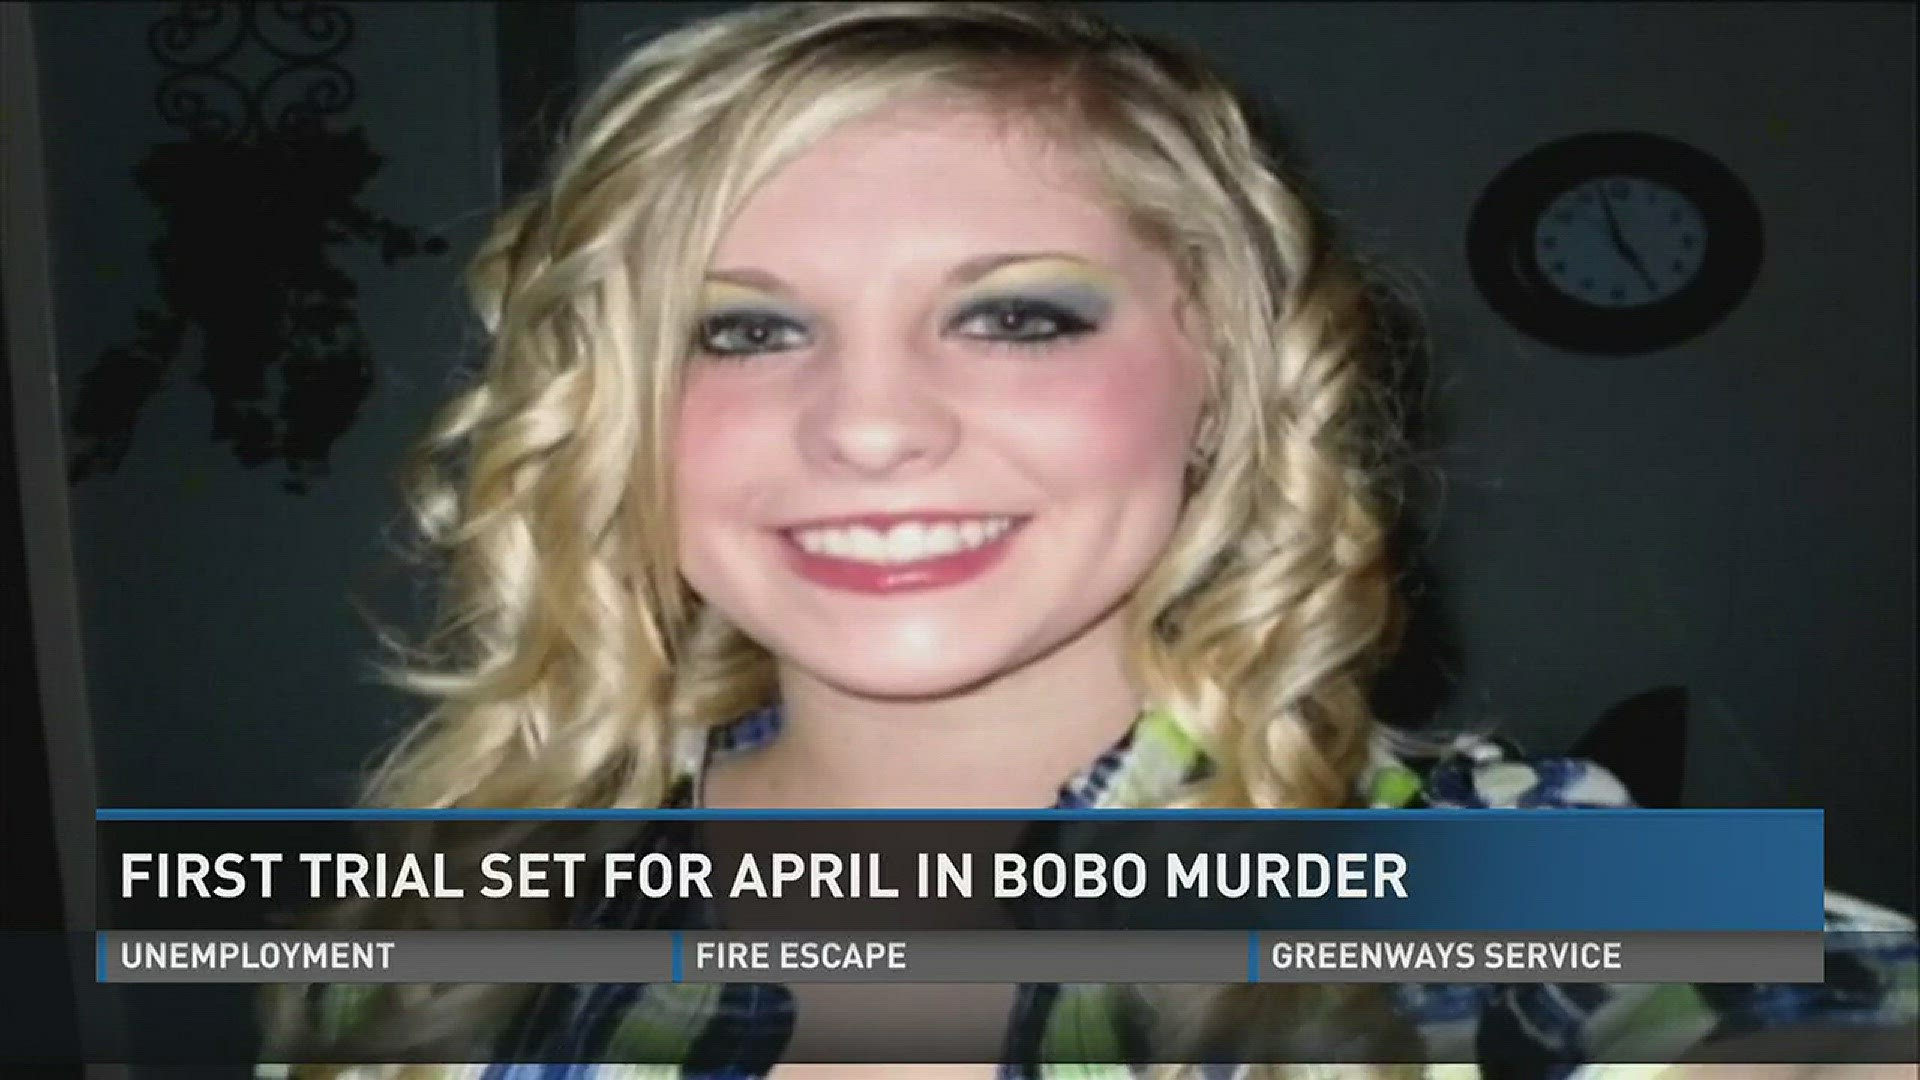 Dec. 14, 2016: A judge has set the trial date for the first suspect in the Holly Bobo murder case.